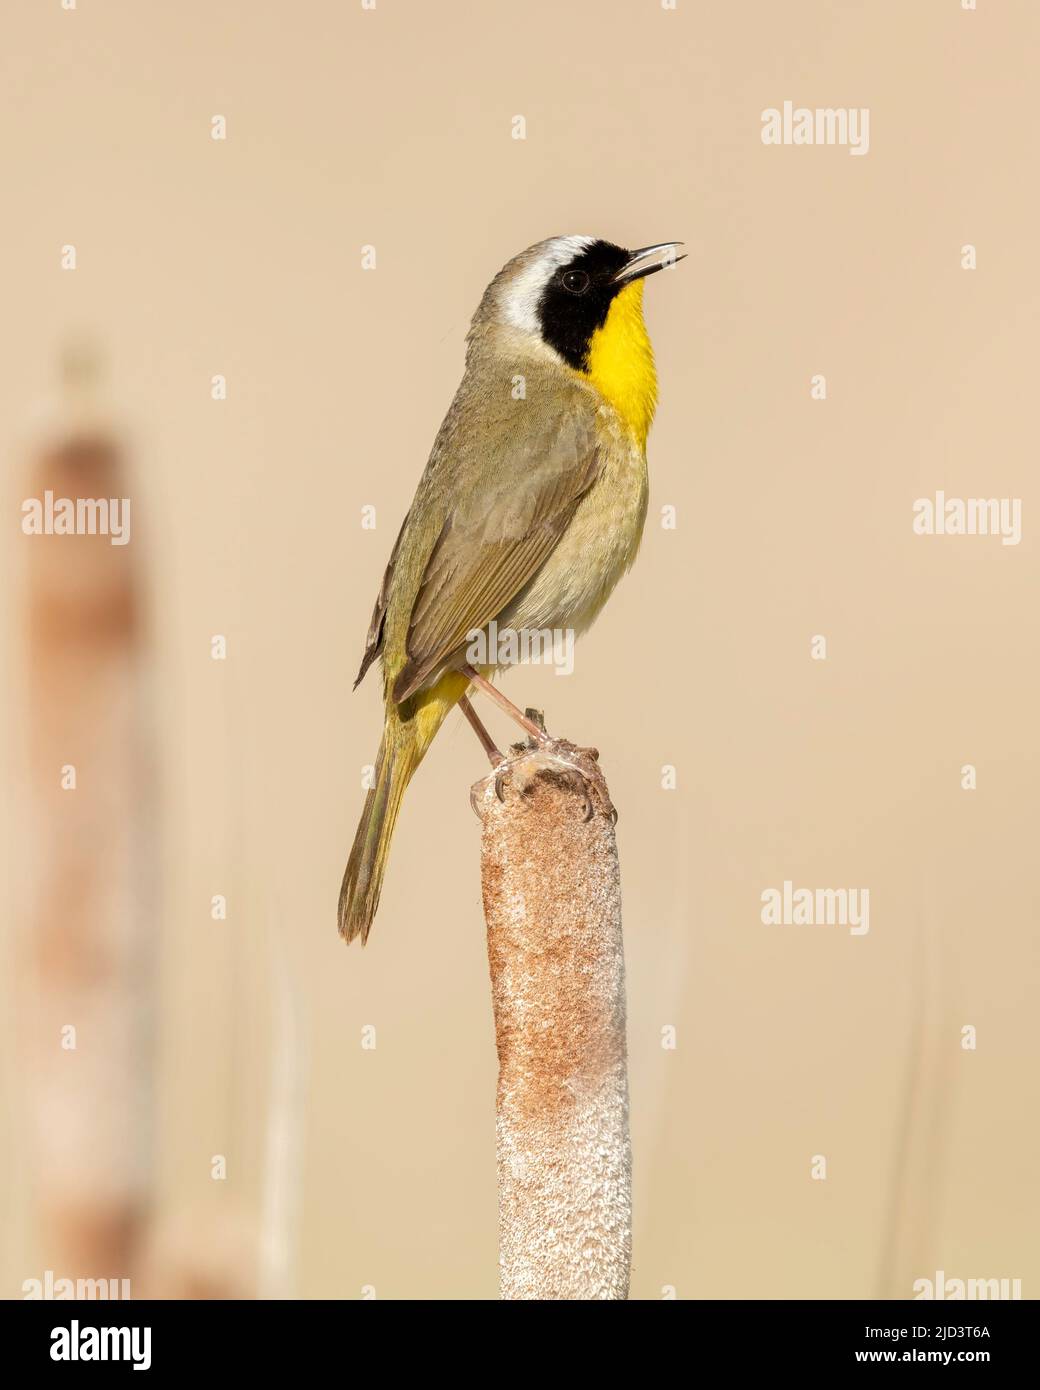 Common Yellowthroat (Geothlypis trichas), perched on cattails,  Kamloops, British Columbia, Canada, North America Stock Photo